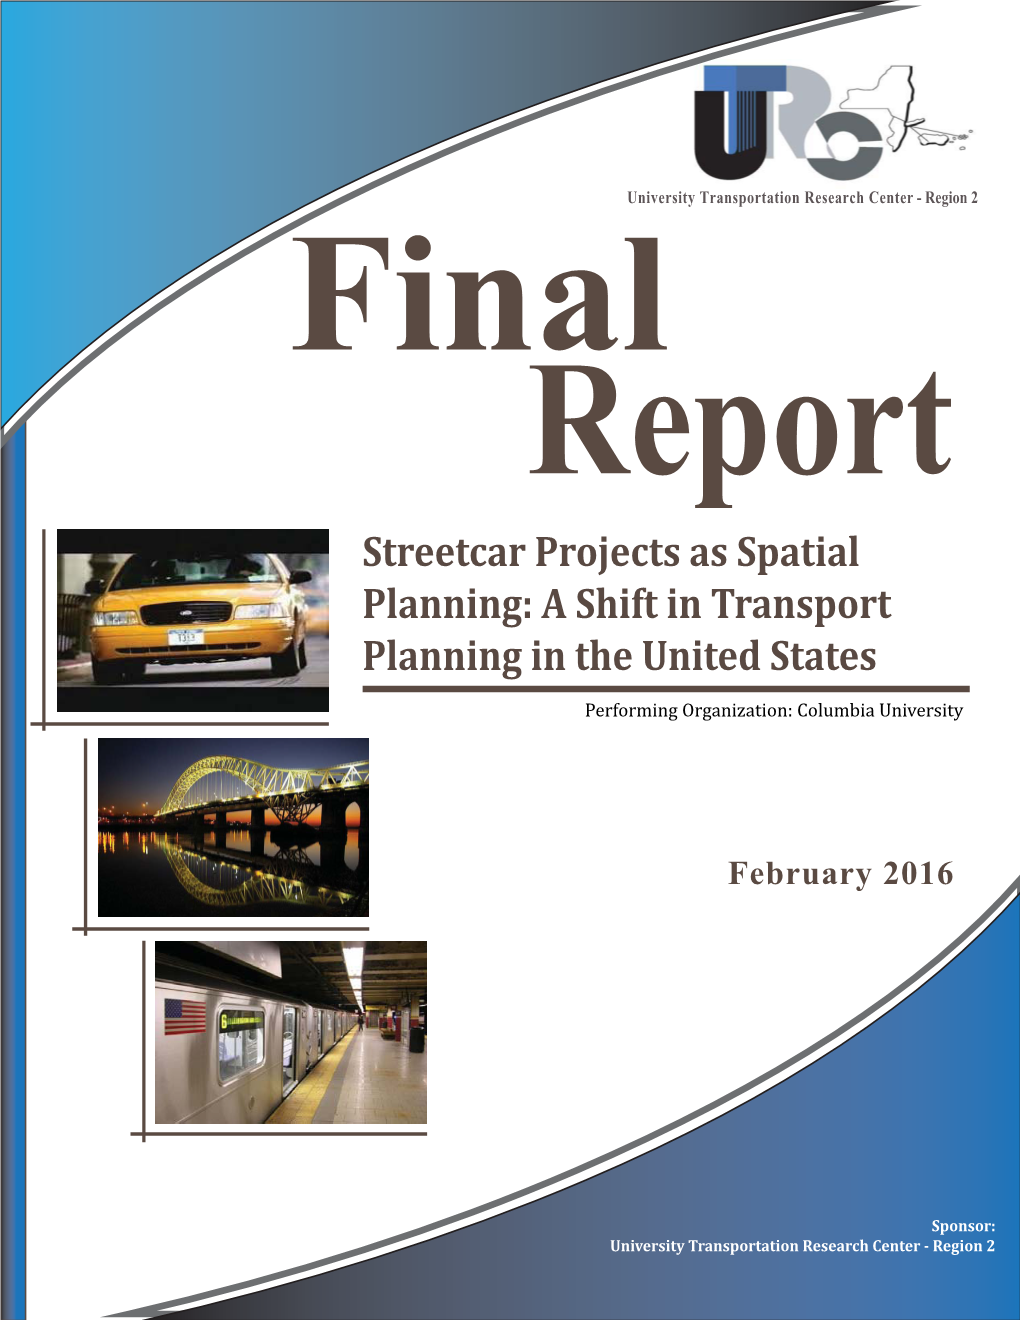 Streetcar Projects As Spatial Planning: a Shift in Transport Planning in the United States Performing Organization: Columbia University